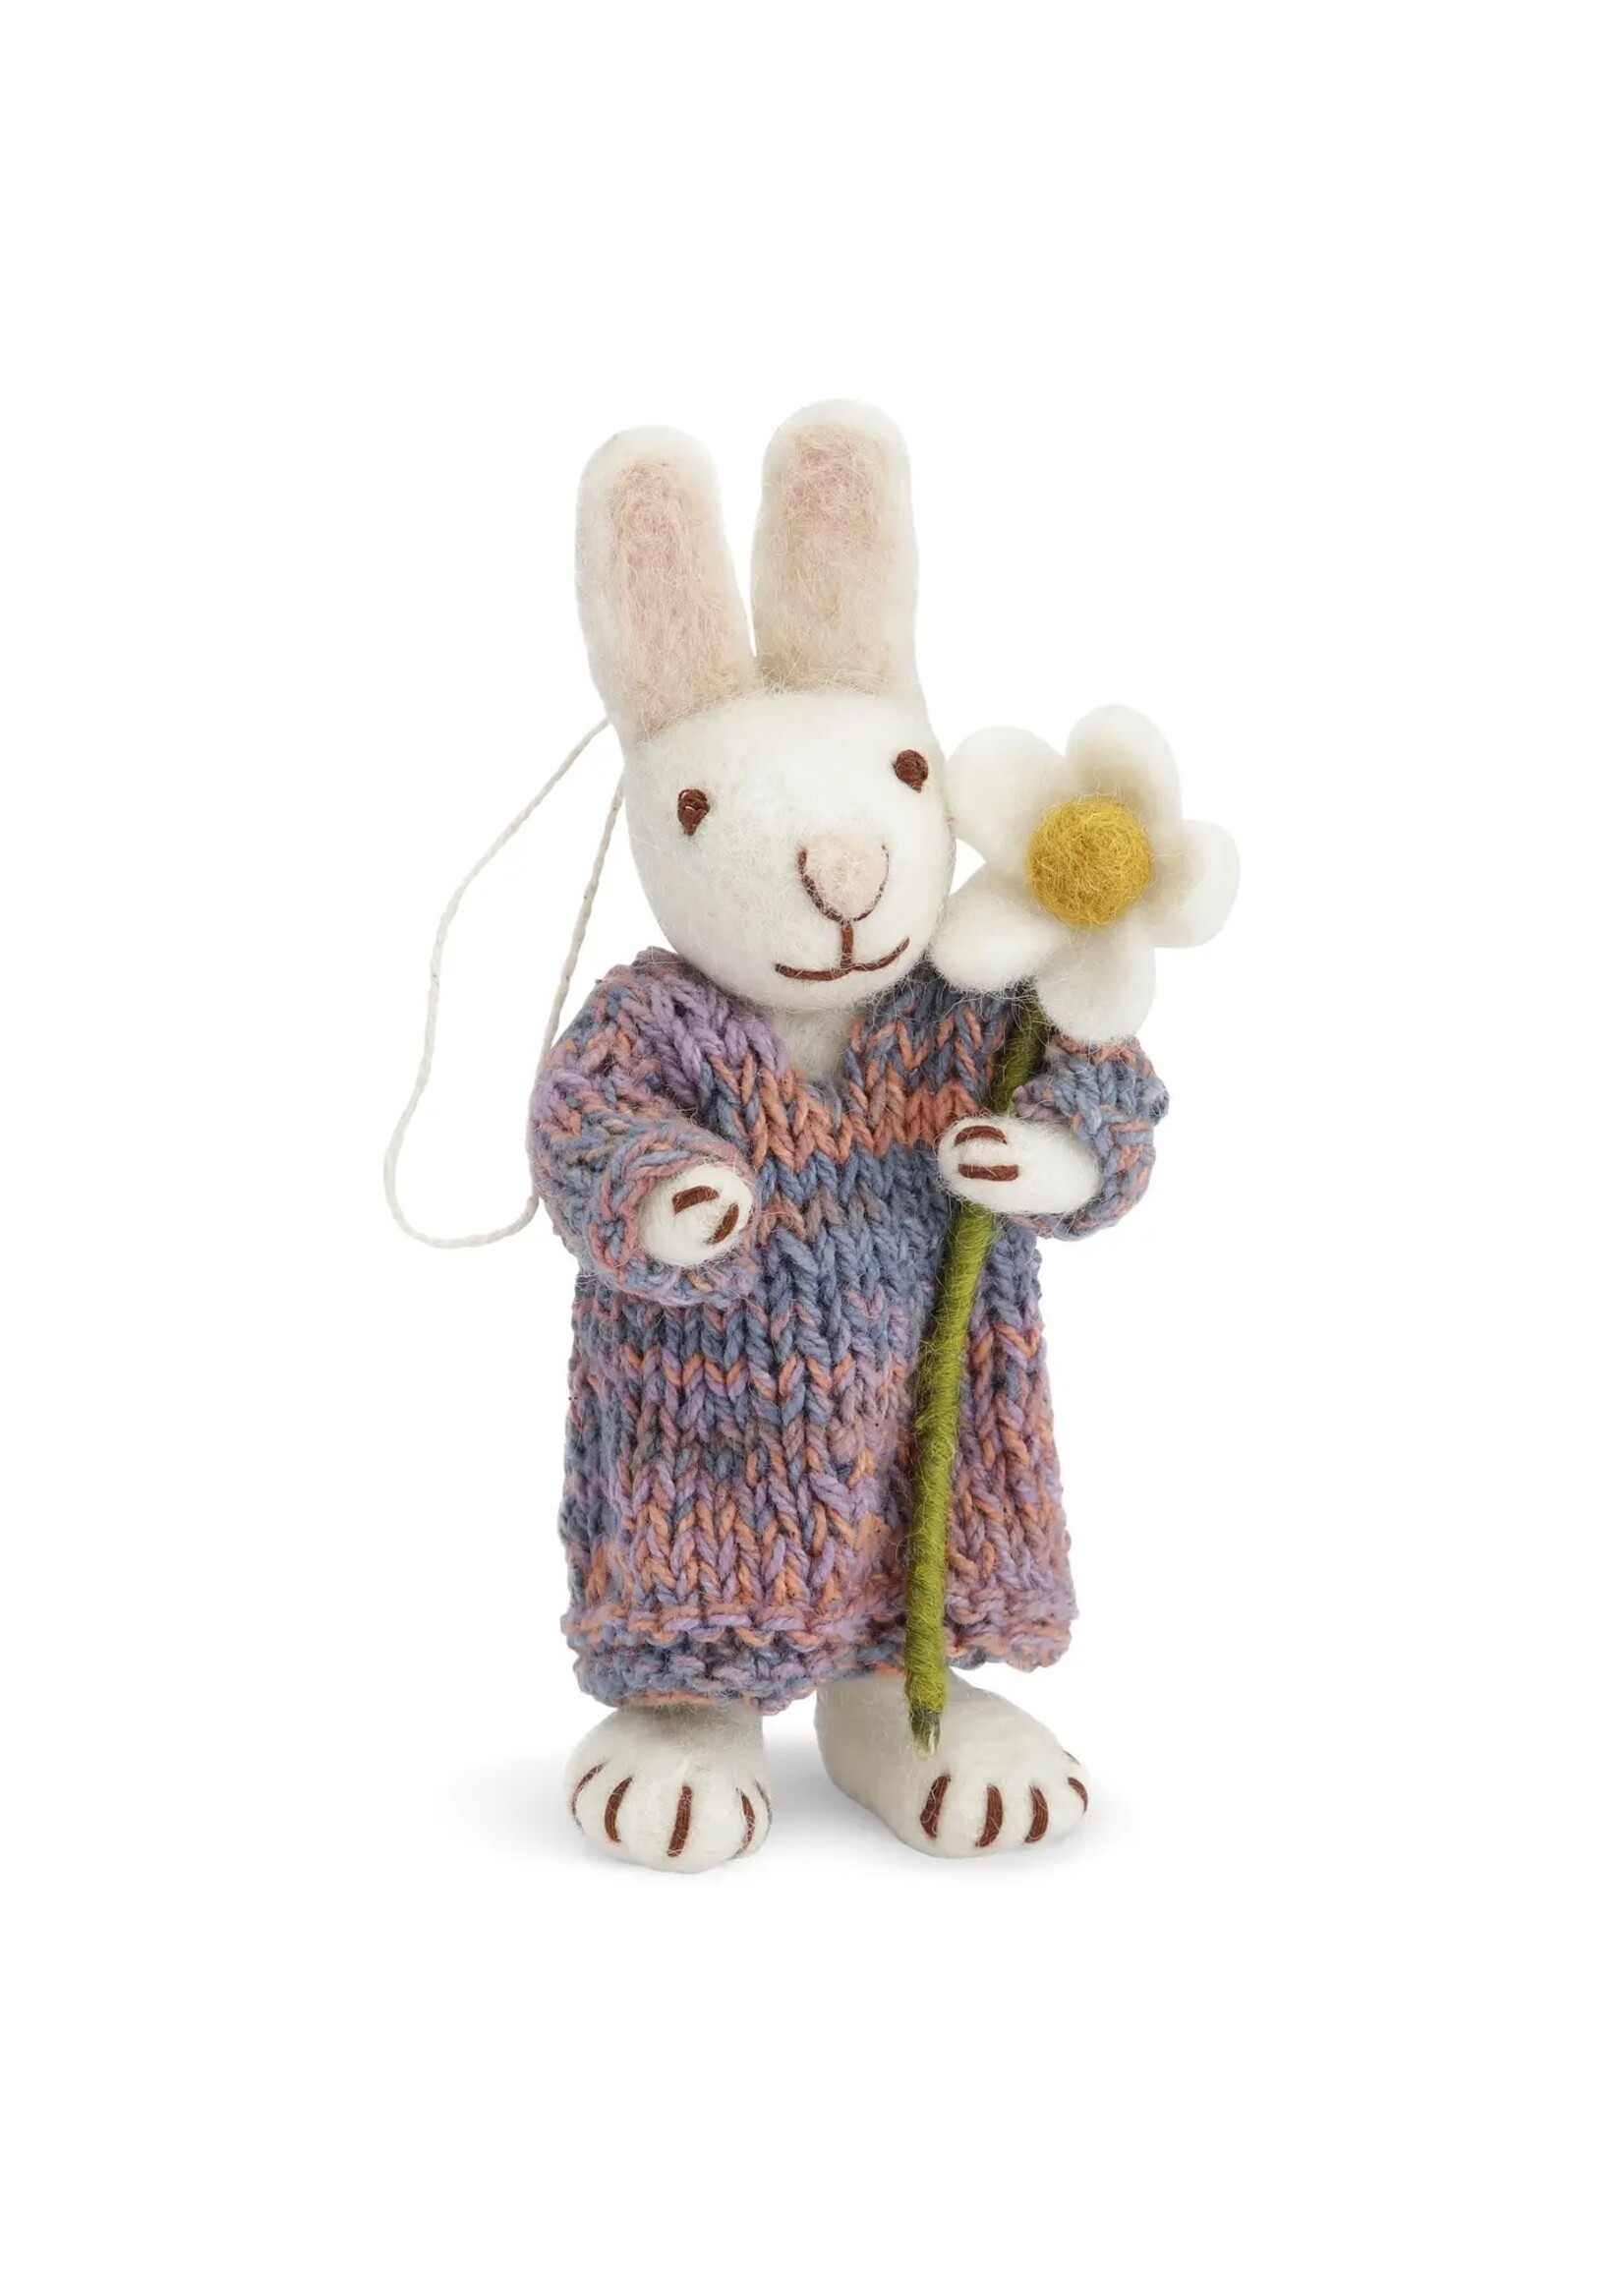 Bunny White with Colorful Dress & Marguerite - Small